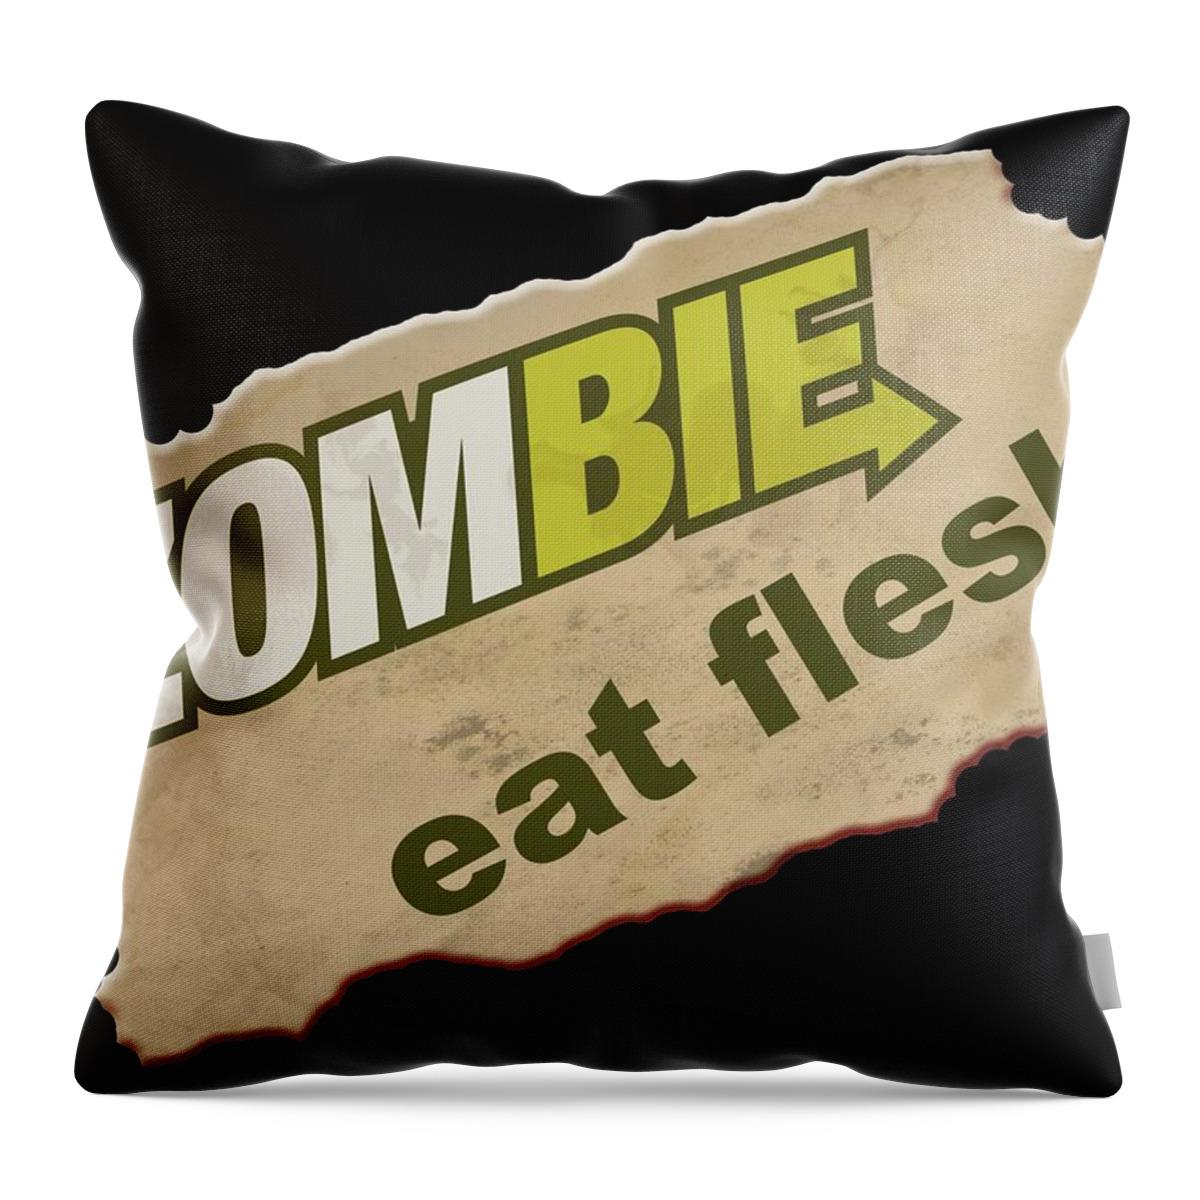 Zombie Throw Pillow featuring the digital art Zombie - Eat Flesh by WB Johnston